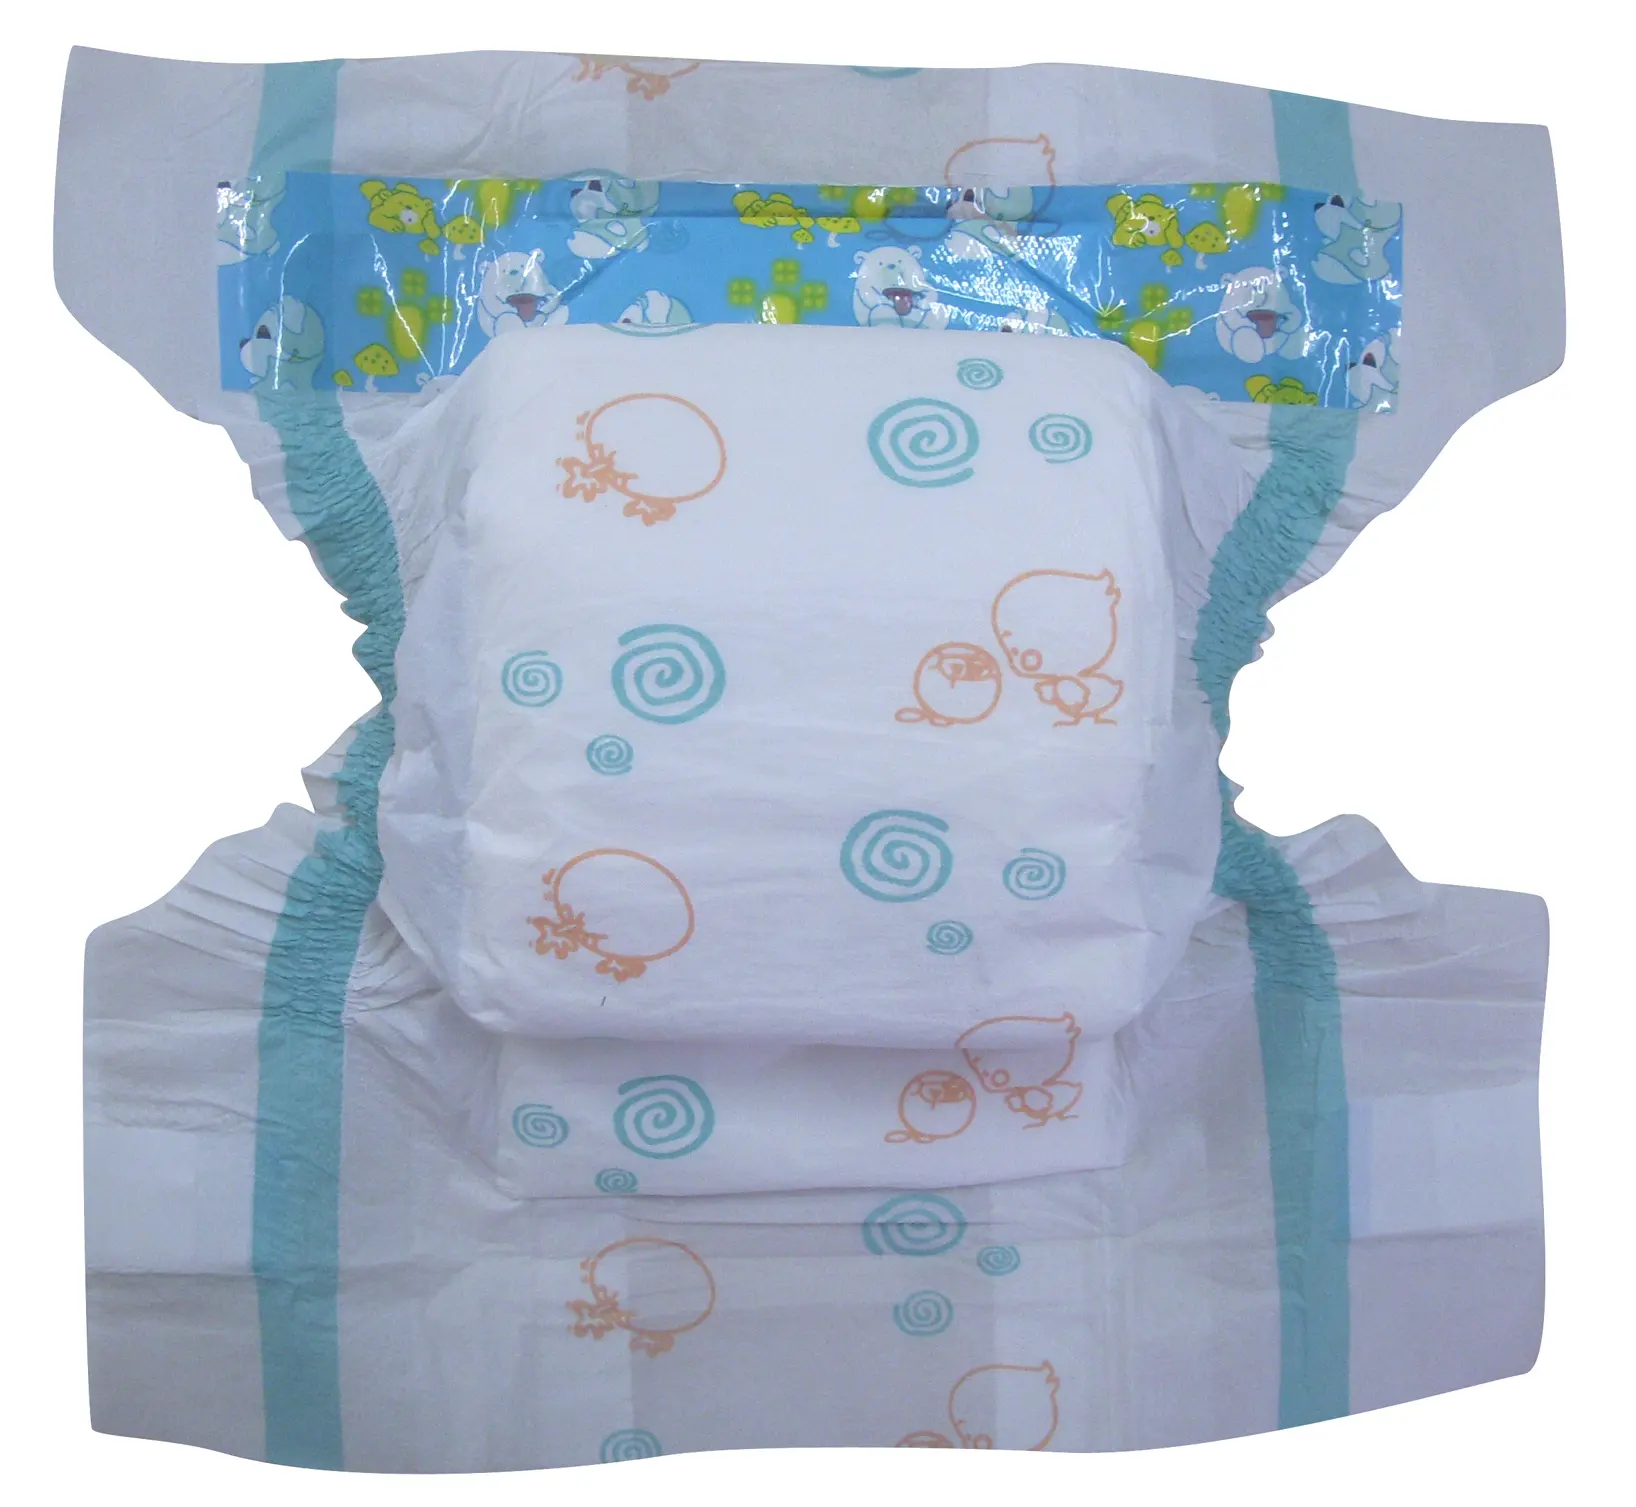 Wholesale Buy Italian High Quality Disposable Baby Diaper Nappy Nappies Size 6 Newborn Distributor Dry